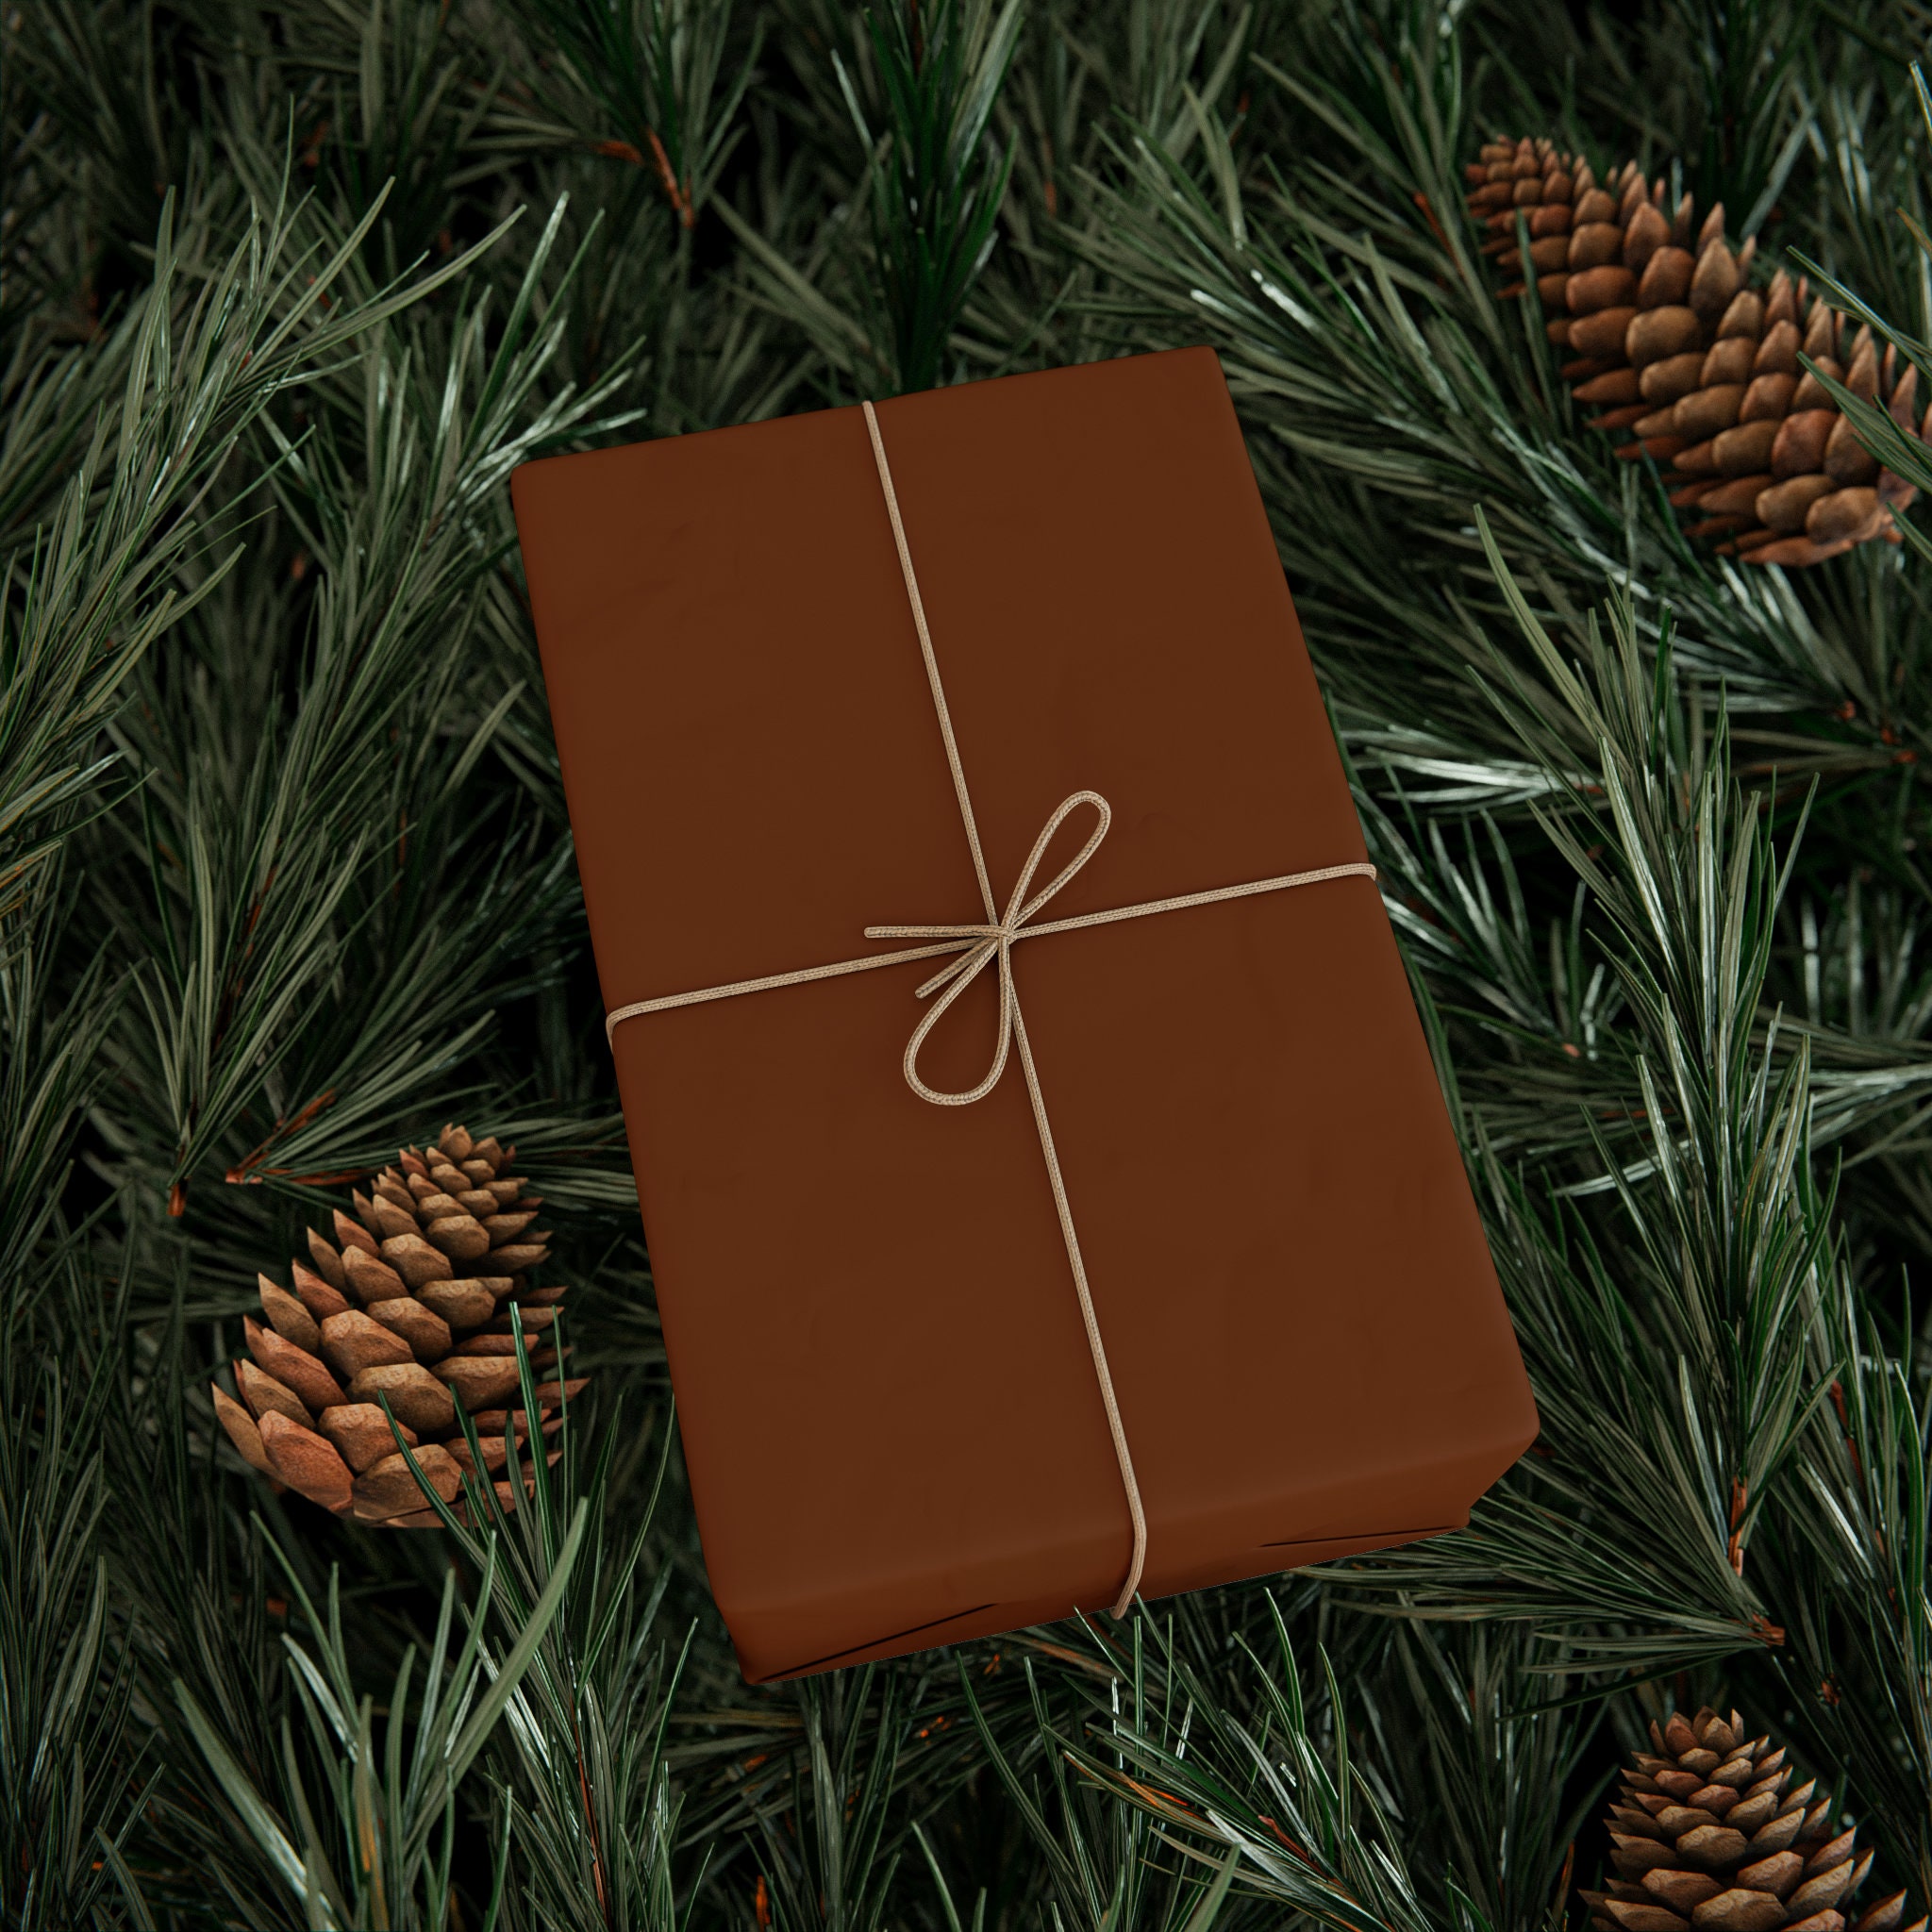 Chocolate Wrapping Paper, Cocoa Elegance: Chocolate-colored Wrapping Paper,  Chocolate Brown Wrapping Paper, Dark Brown Wrapping Paper 